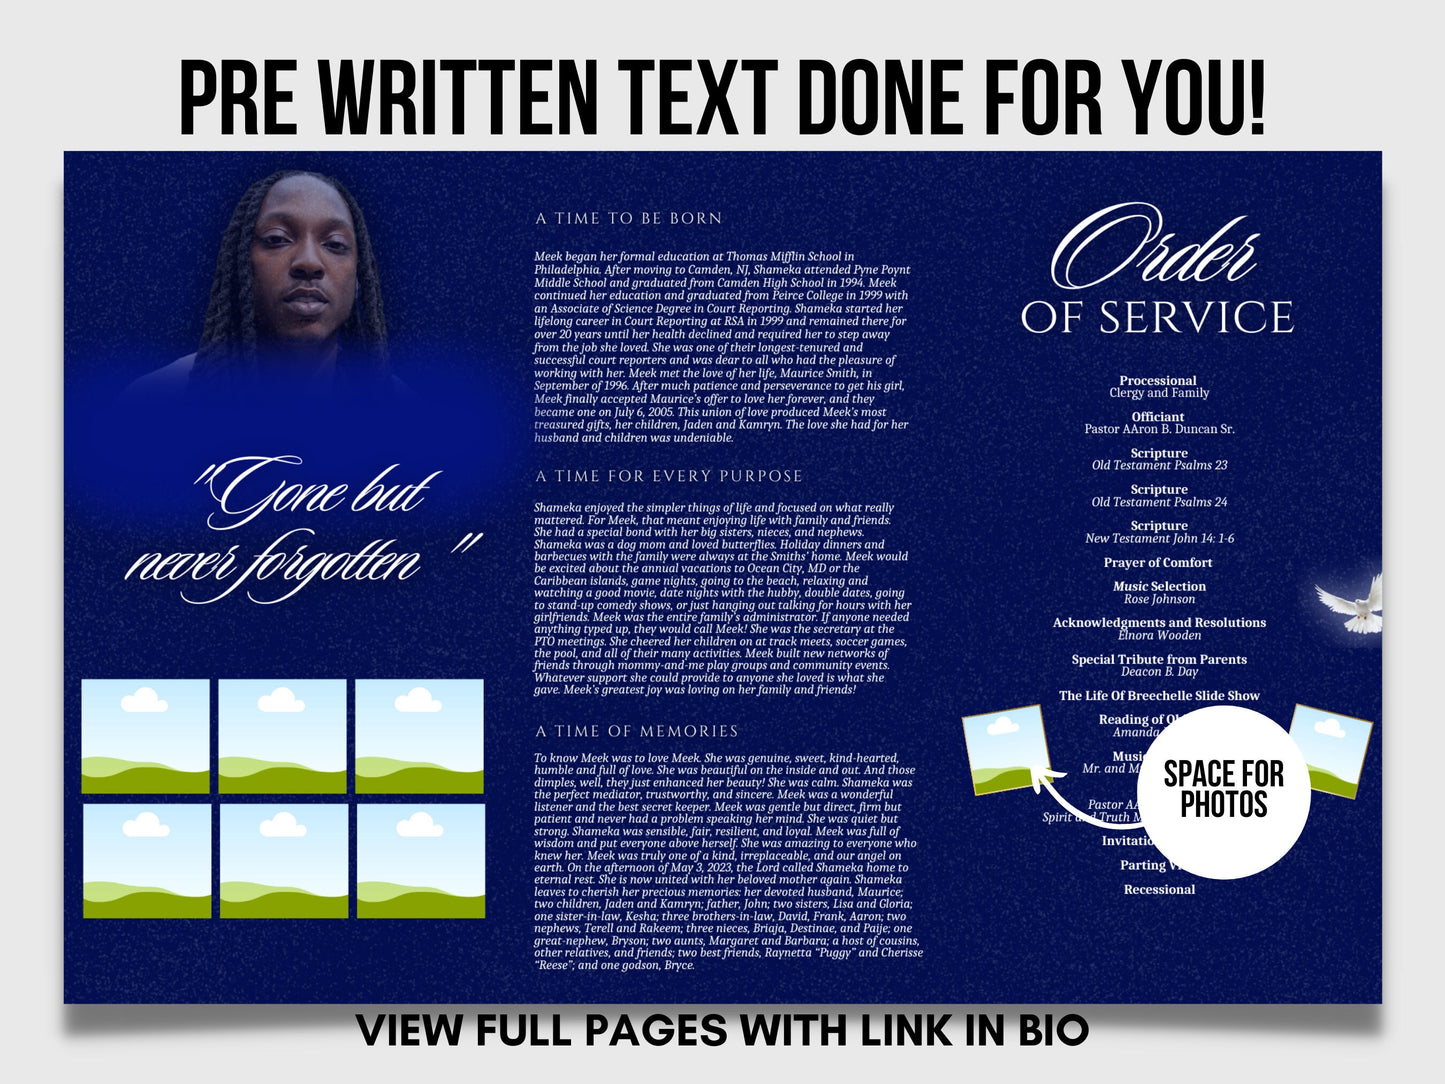 17"x11" FUNERAL OBITUARY TEMPLATE (2 pages) |Blue Rose Funeral Program | Celebration of Life |Classy Obituary |Canva Template